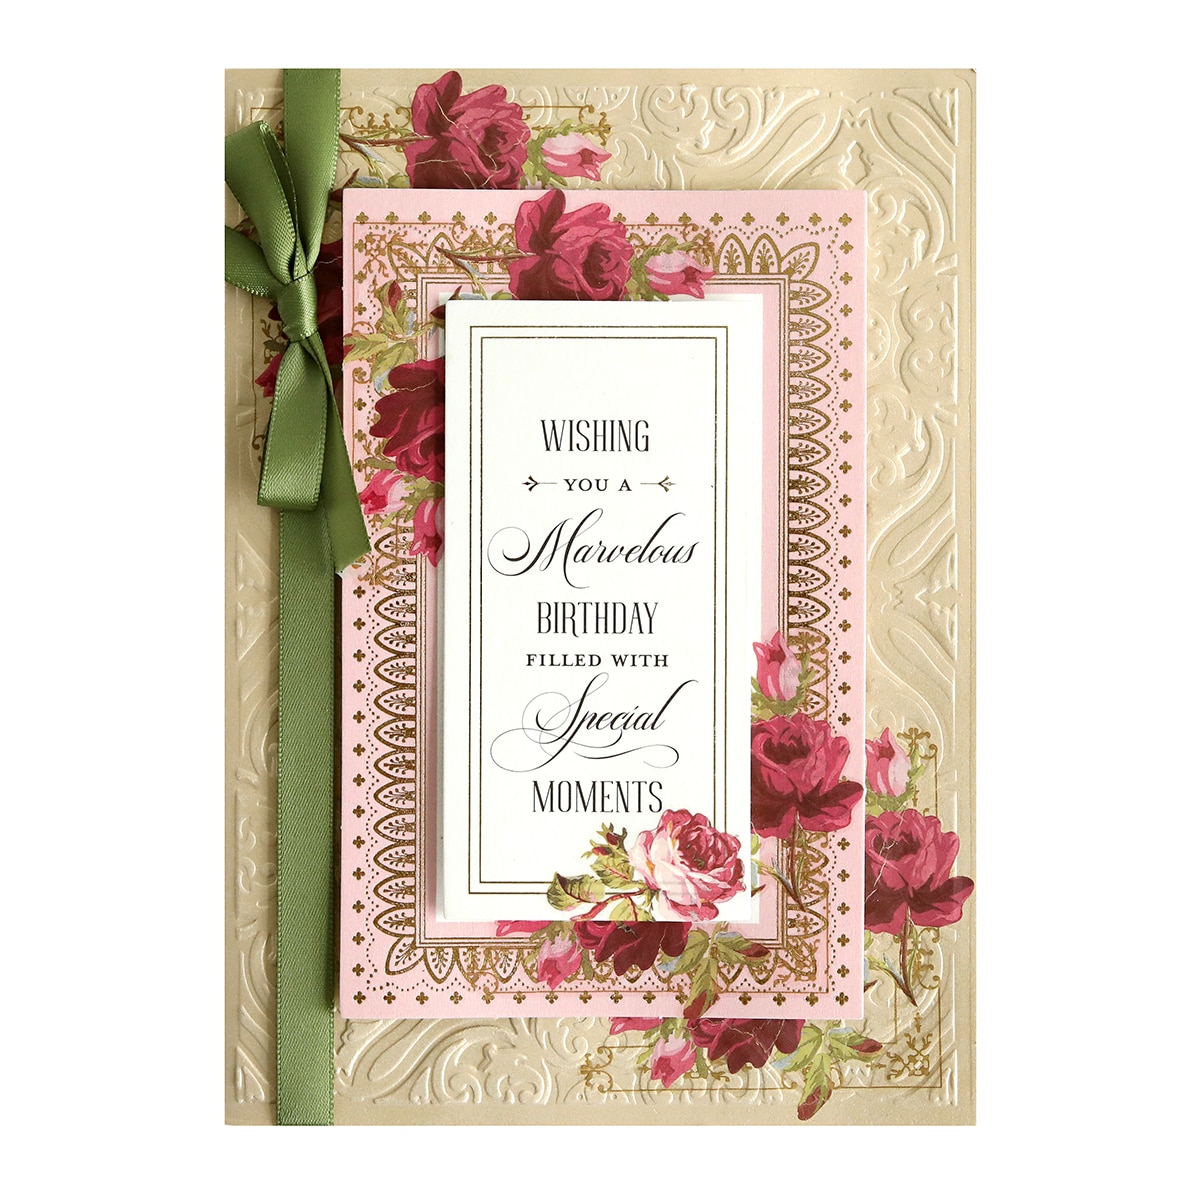 A pink and green card with roses on it.